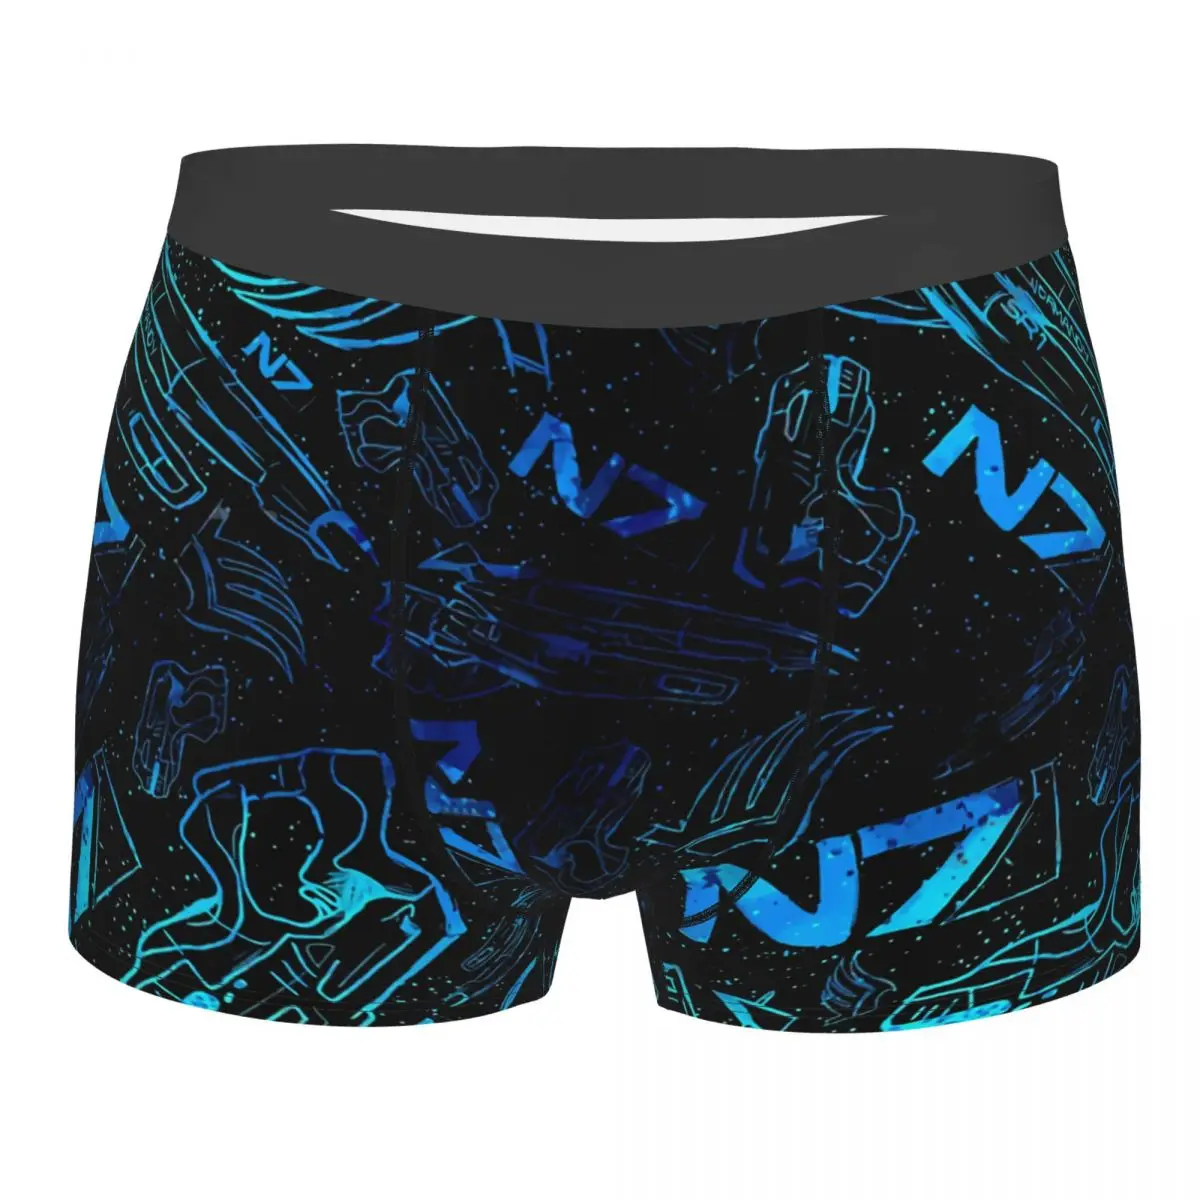 

Paragon Shepard Pattern Effect Mass Gaming Gamer Sci Fi Men Boxer Briefs Underpants Art Highly Breathable Sexy Shorts Gift